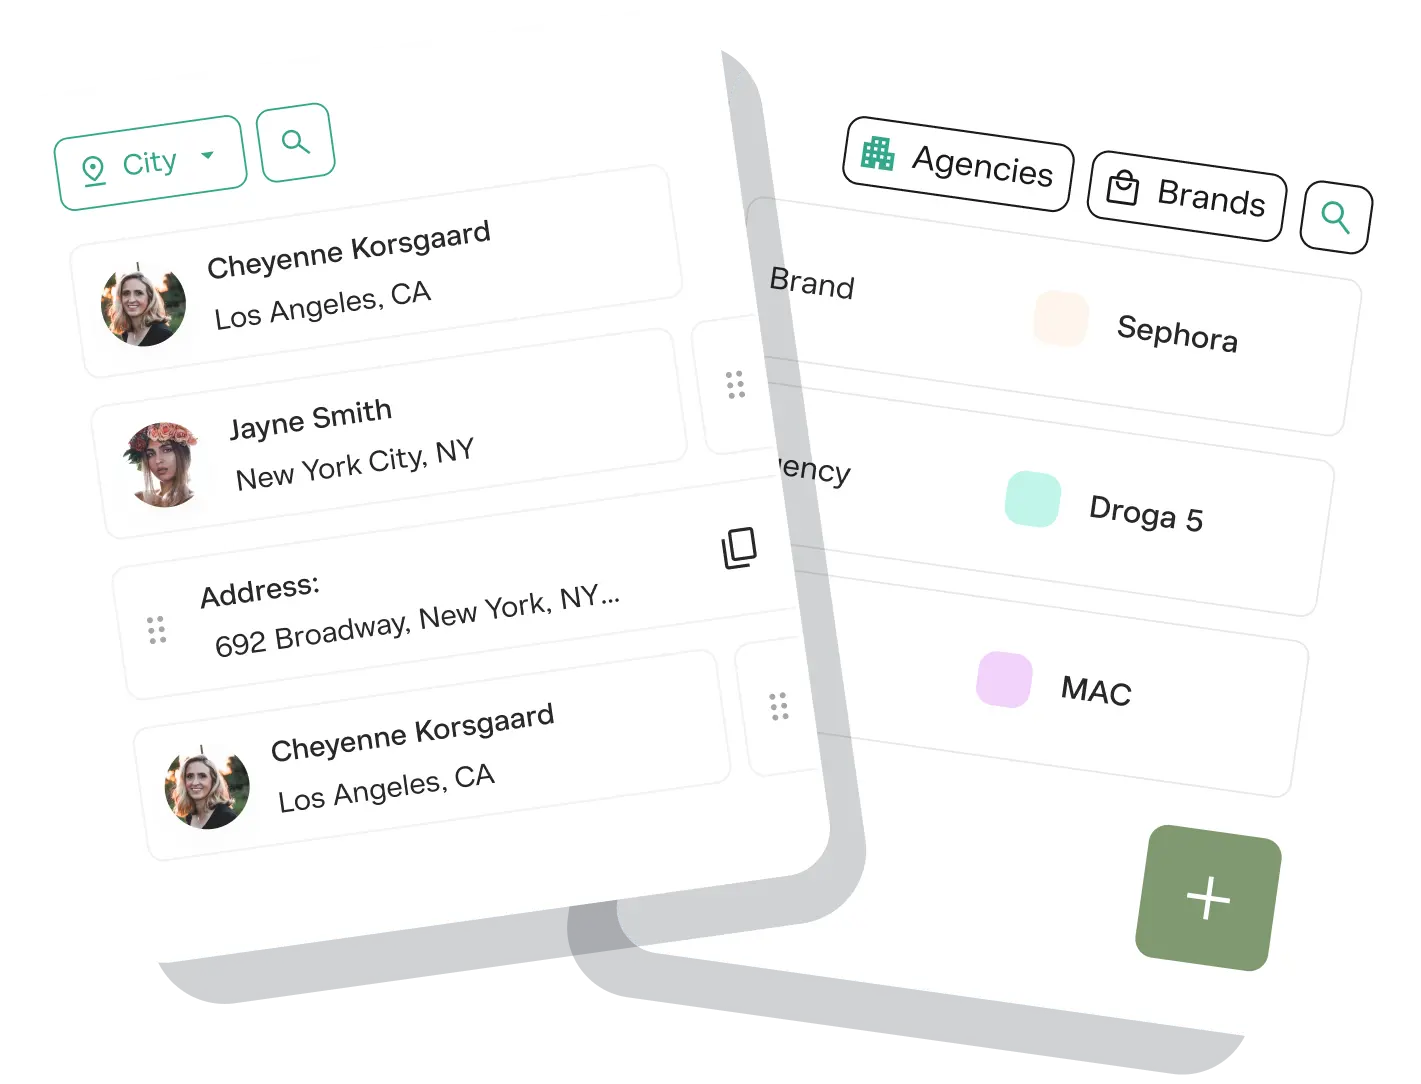 UI for managing clients, brands, and influencers